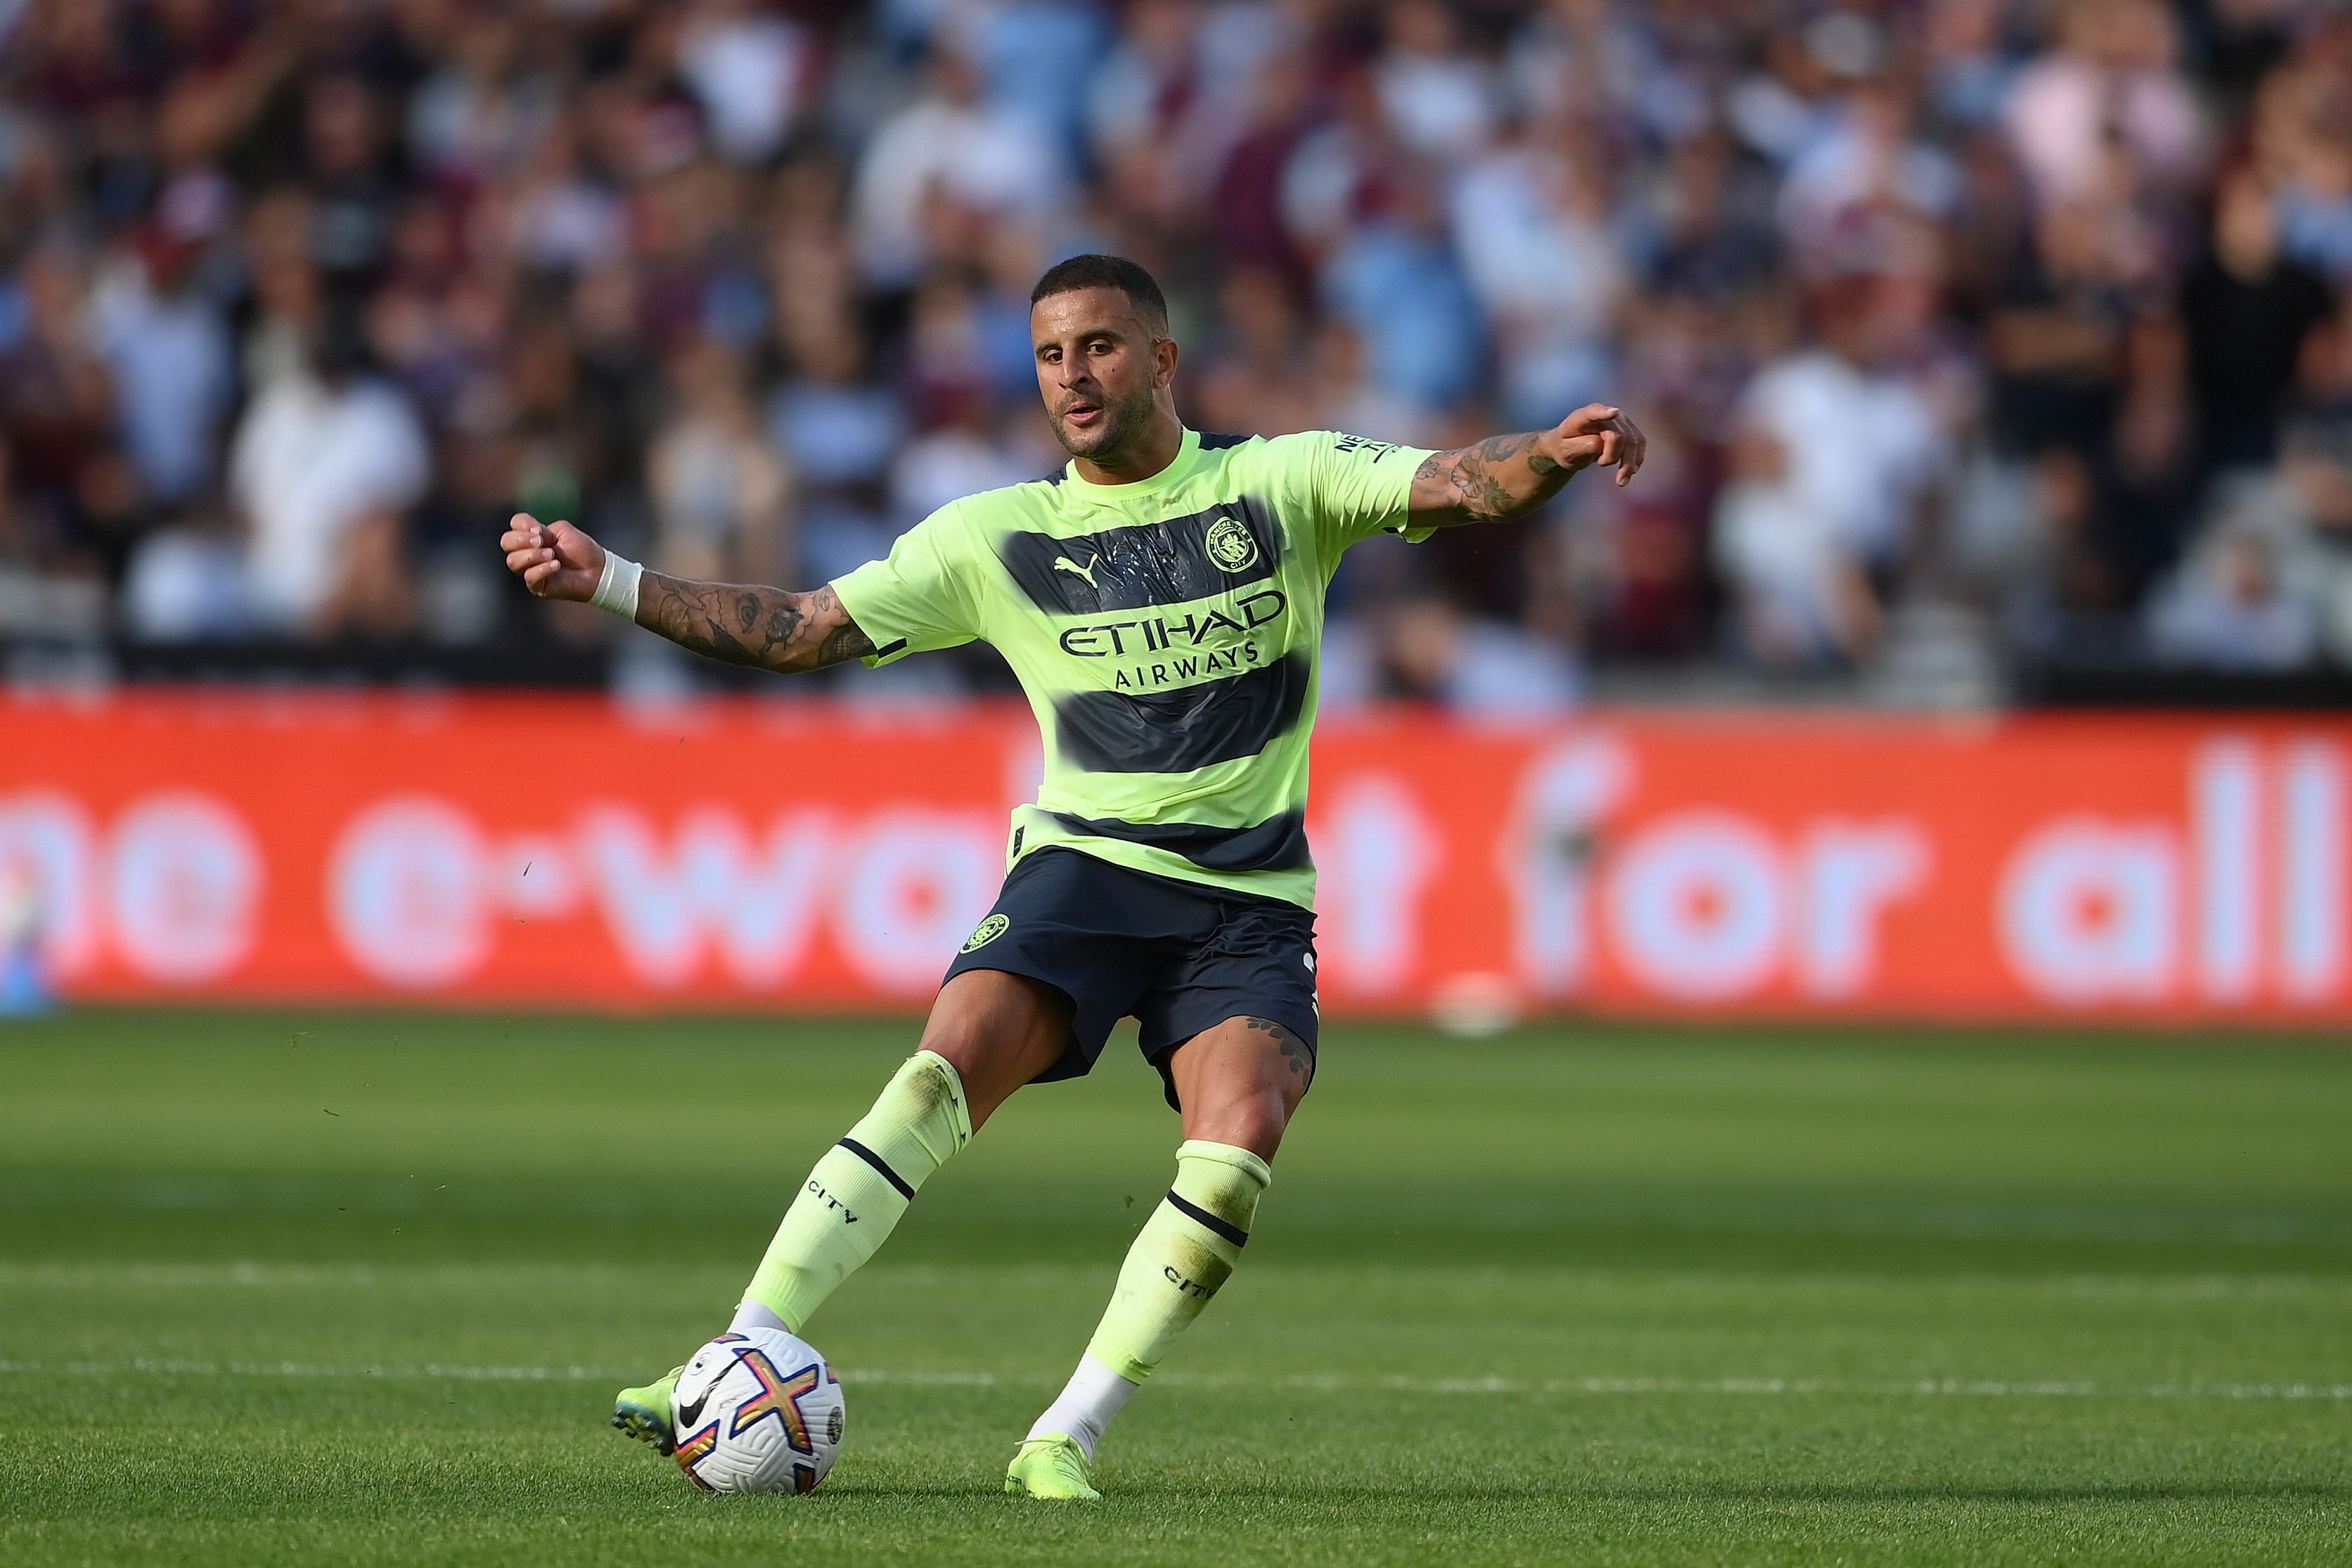 Kyle Walker of Manchester City in action during the Premier League match